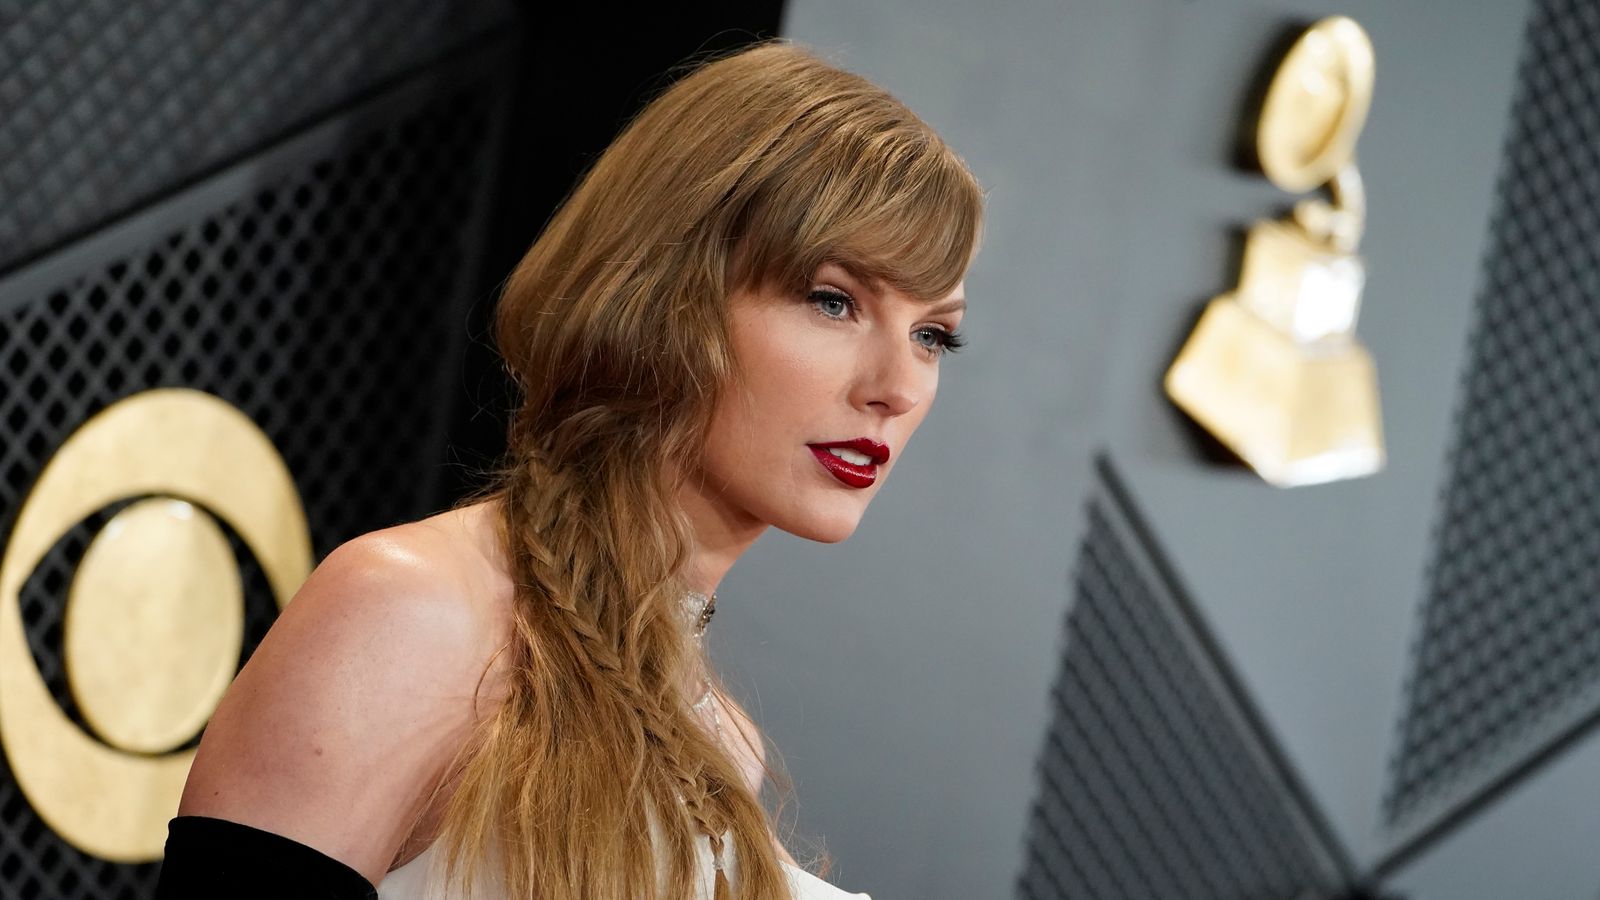 Taylor Swift's dad accused of punching photographer in face after Sydney show